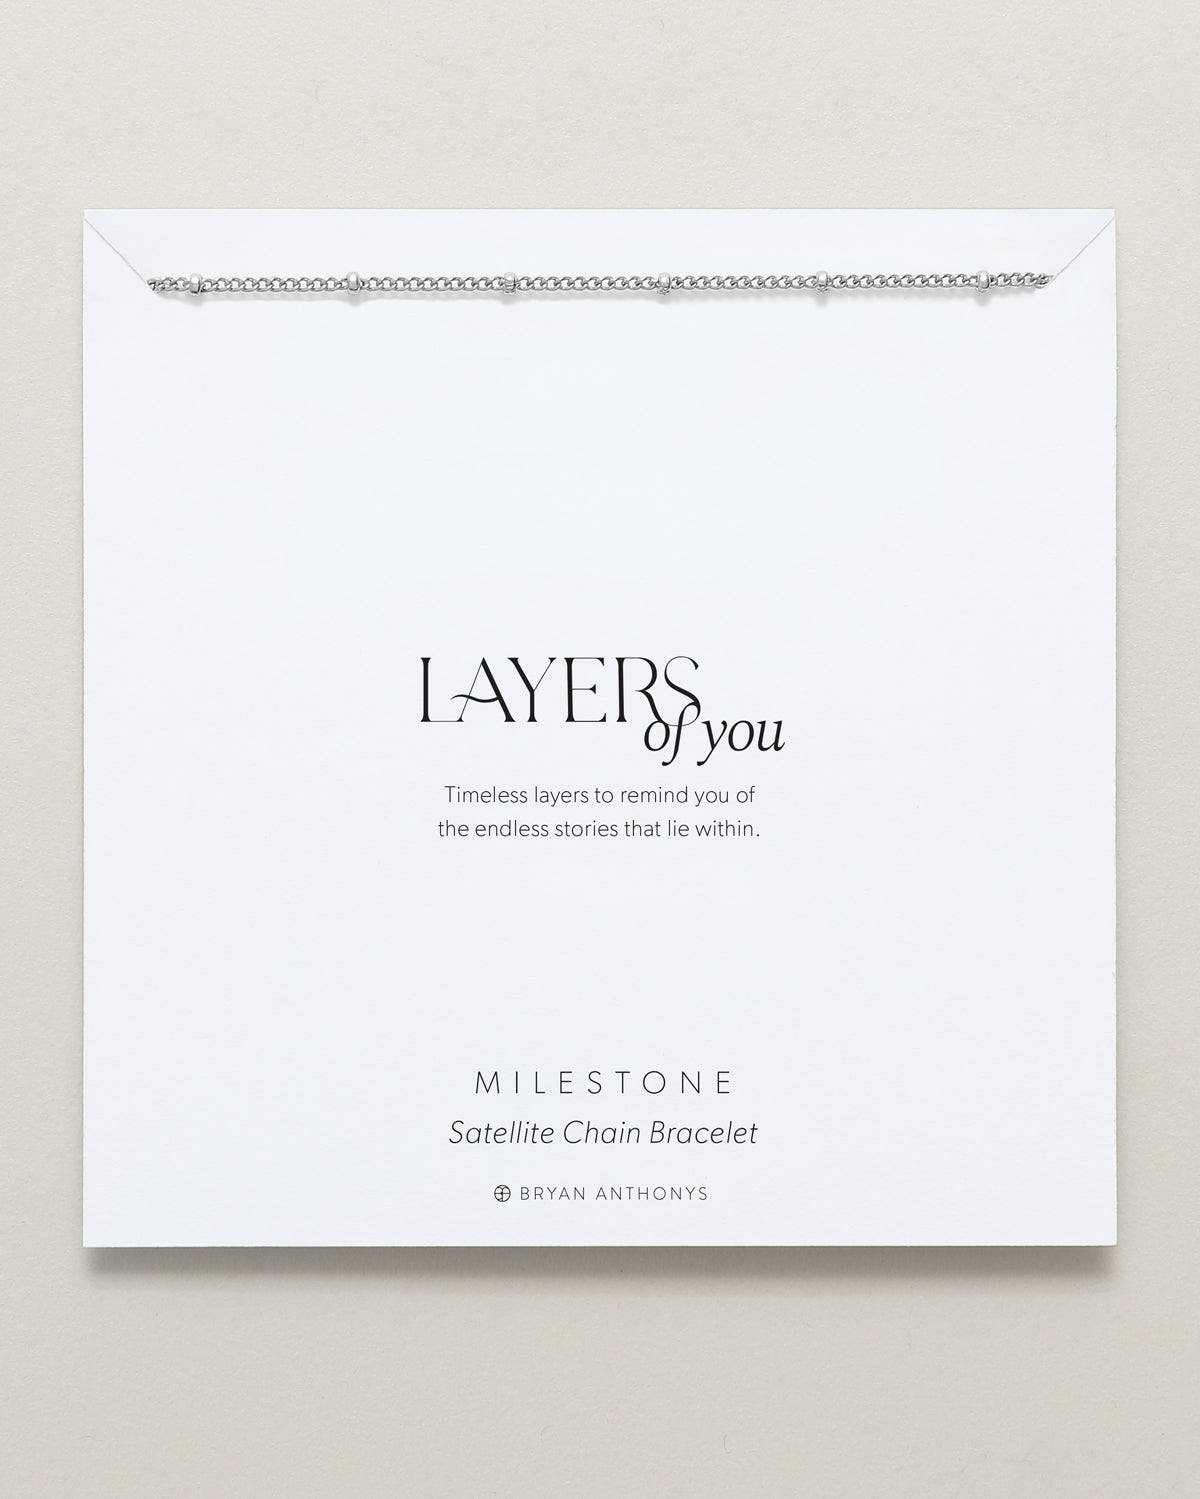 Bryan Anthonys Layers of You Milestone Silver Satellite Chain Bracelet On Card